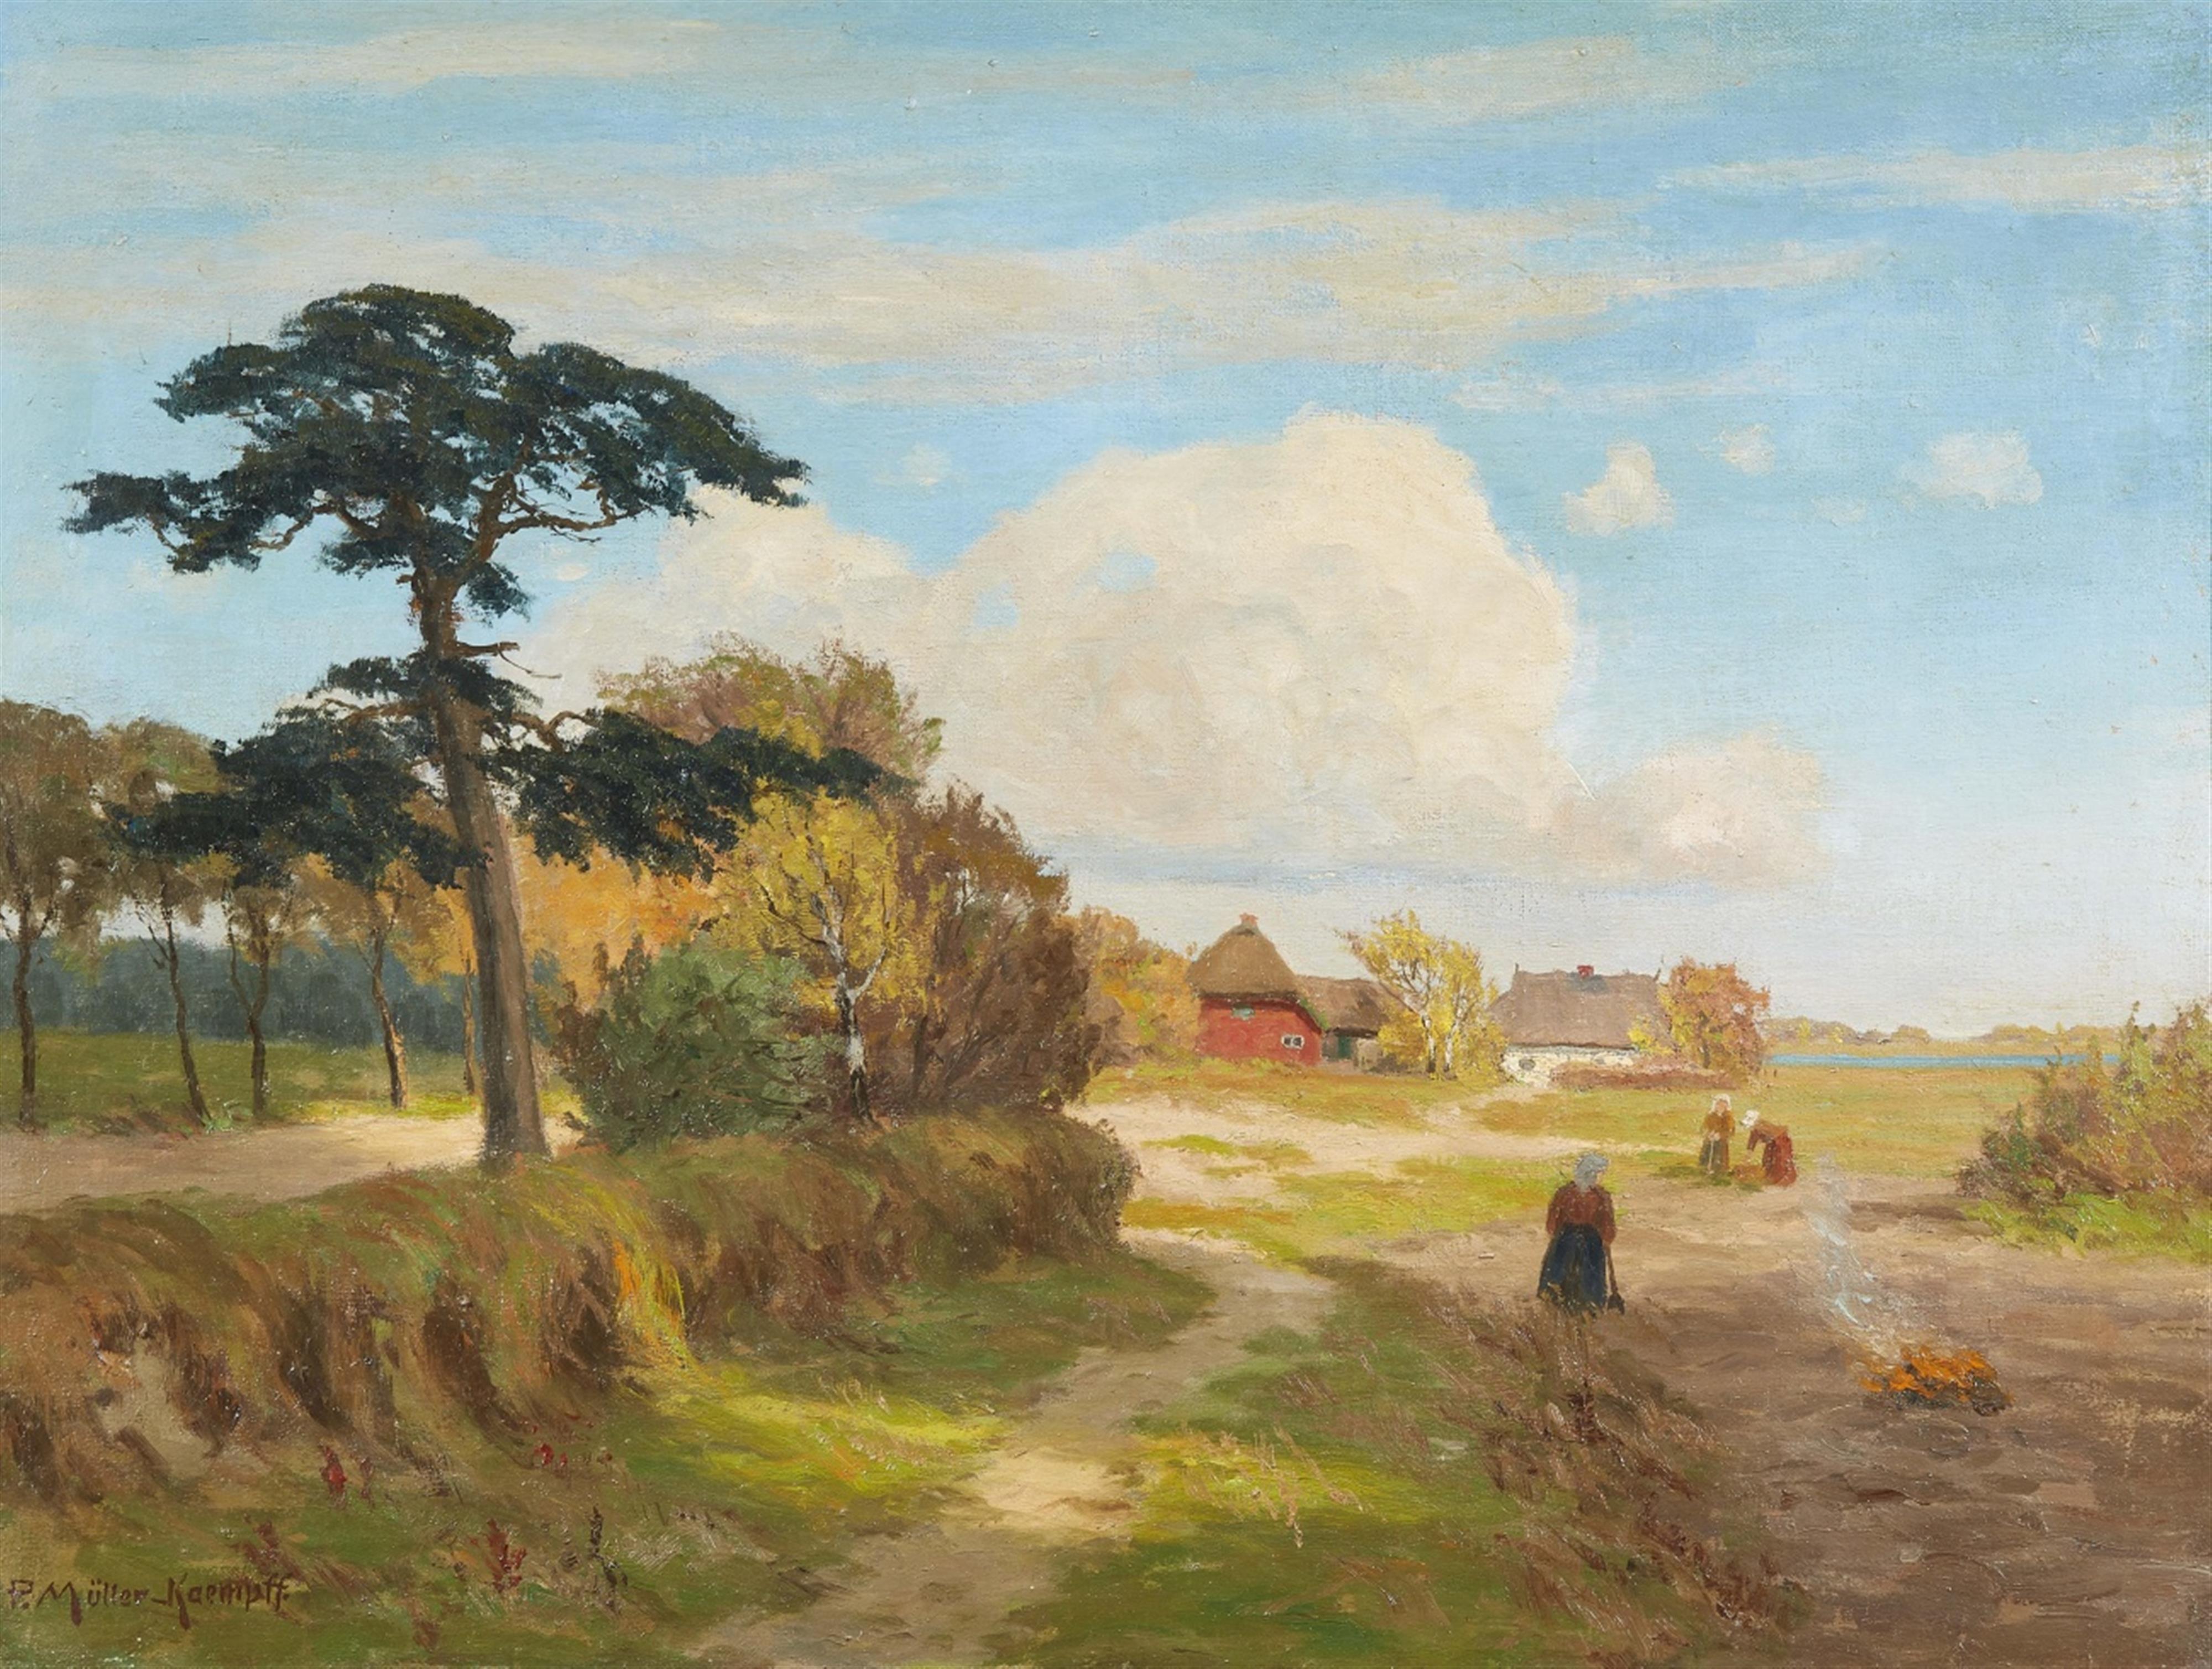 Paul Müller-Kaempff - Landscape with Peasant Women at Work - image-1